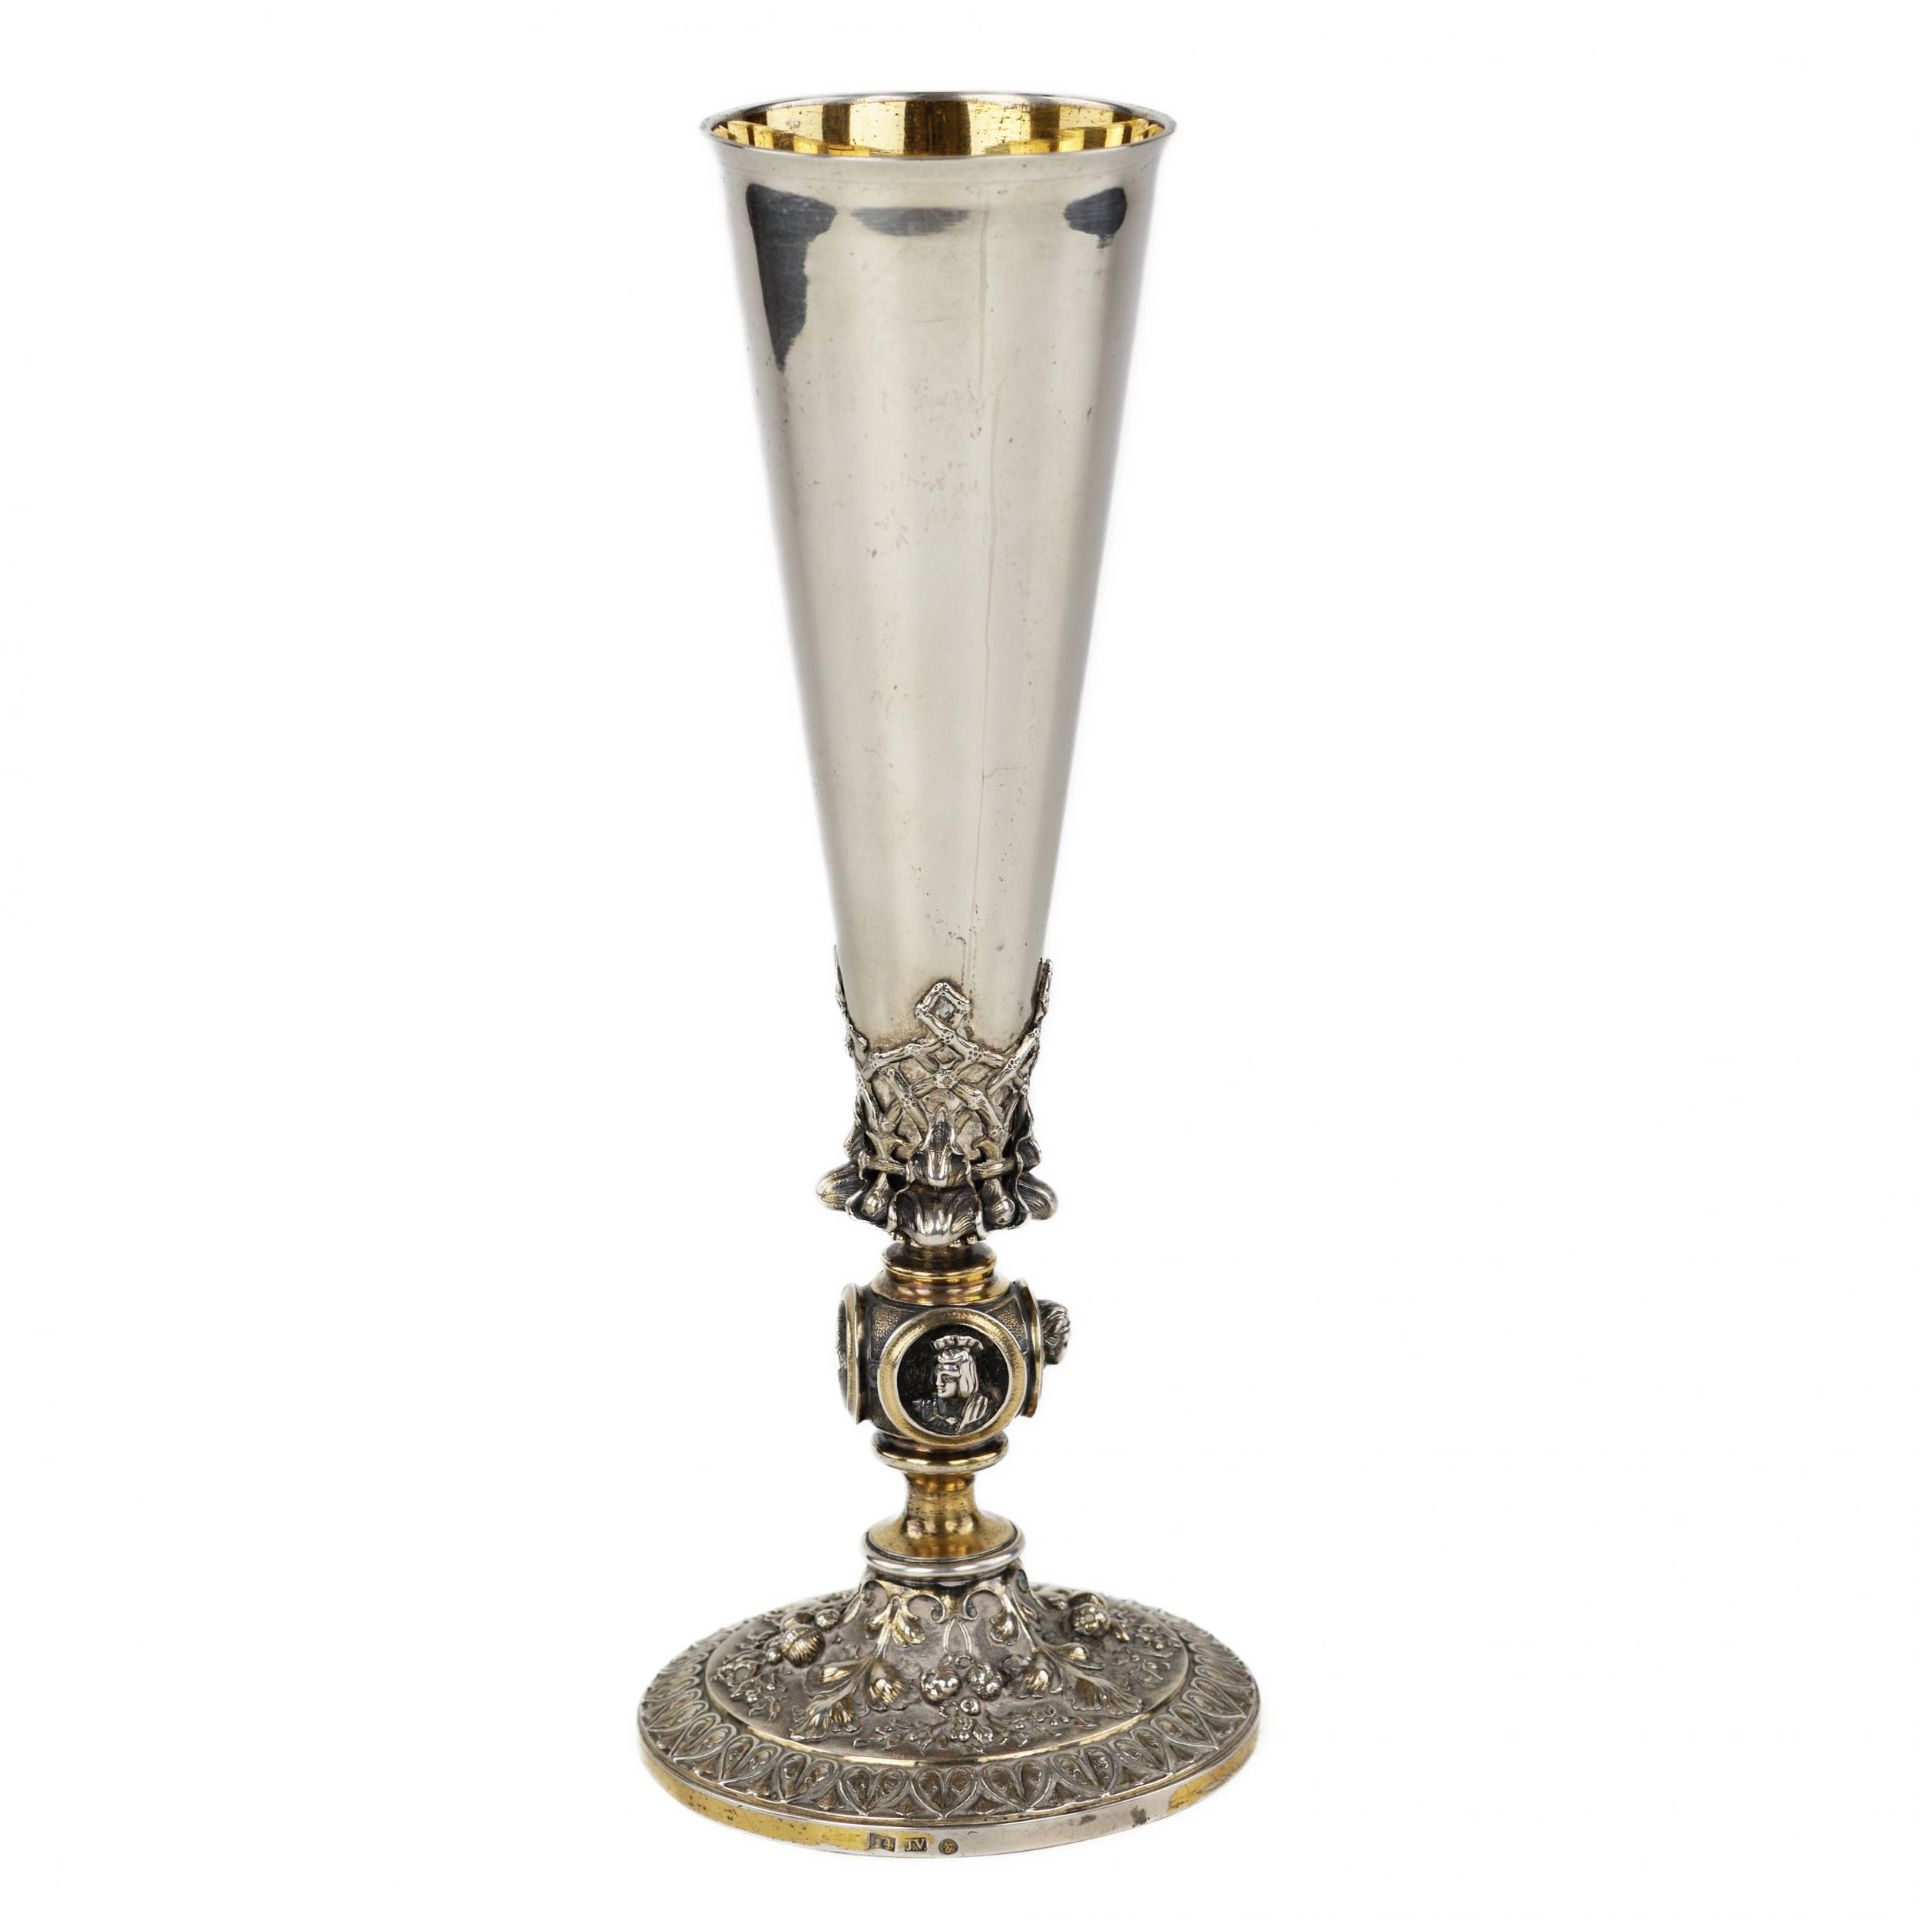 Gilded silver goblet. St. Petersburg, 84 samples, late 19th century. - Image 2 of 10